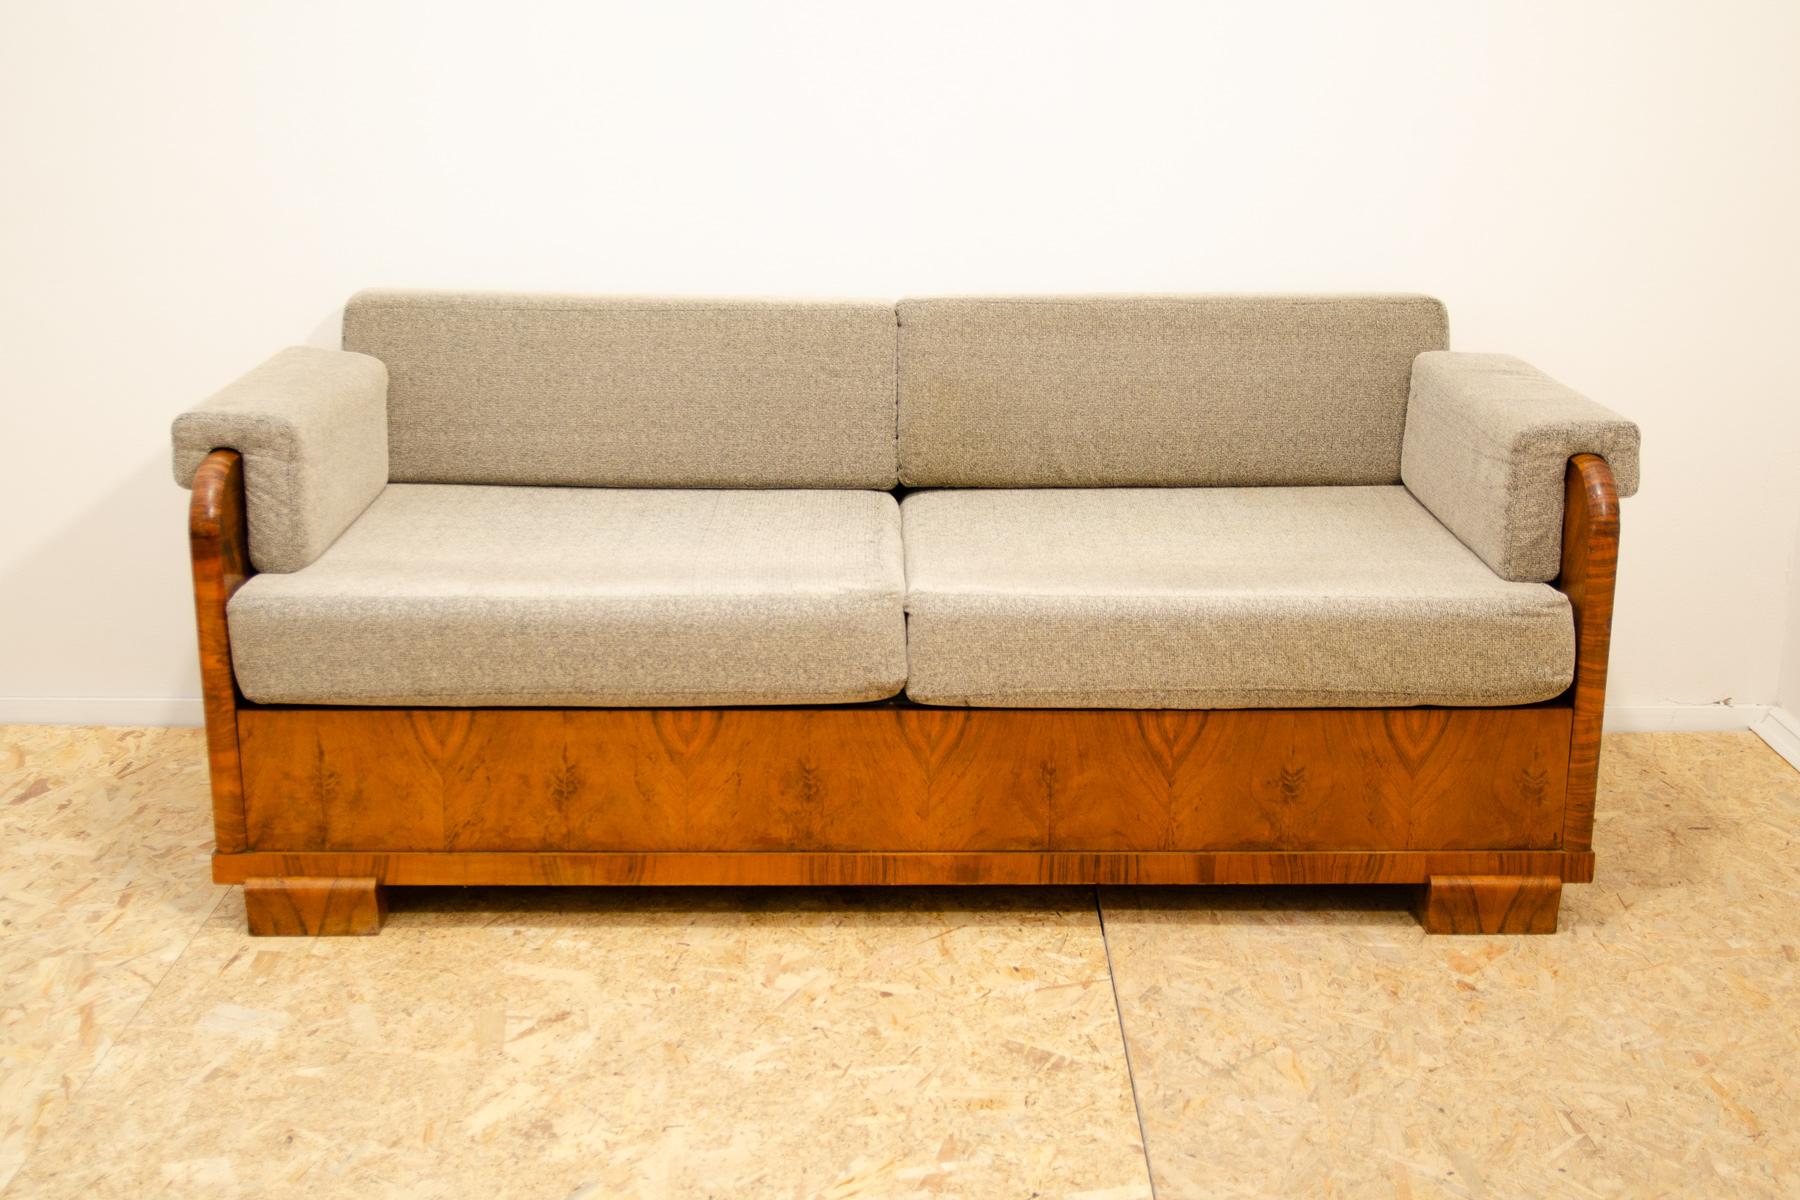 ART DECO couch, made in the 1930s in the former Czechoslovakia. It is made of walnut wood, has upholstered armrests and storage space for bedding. The upholstery has been cleaned, the wood is basically in very good condition, only in one corner